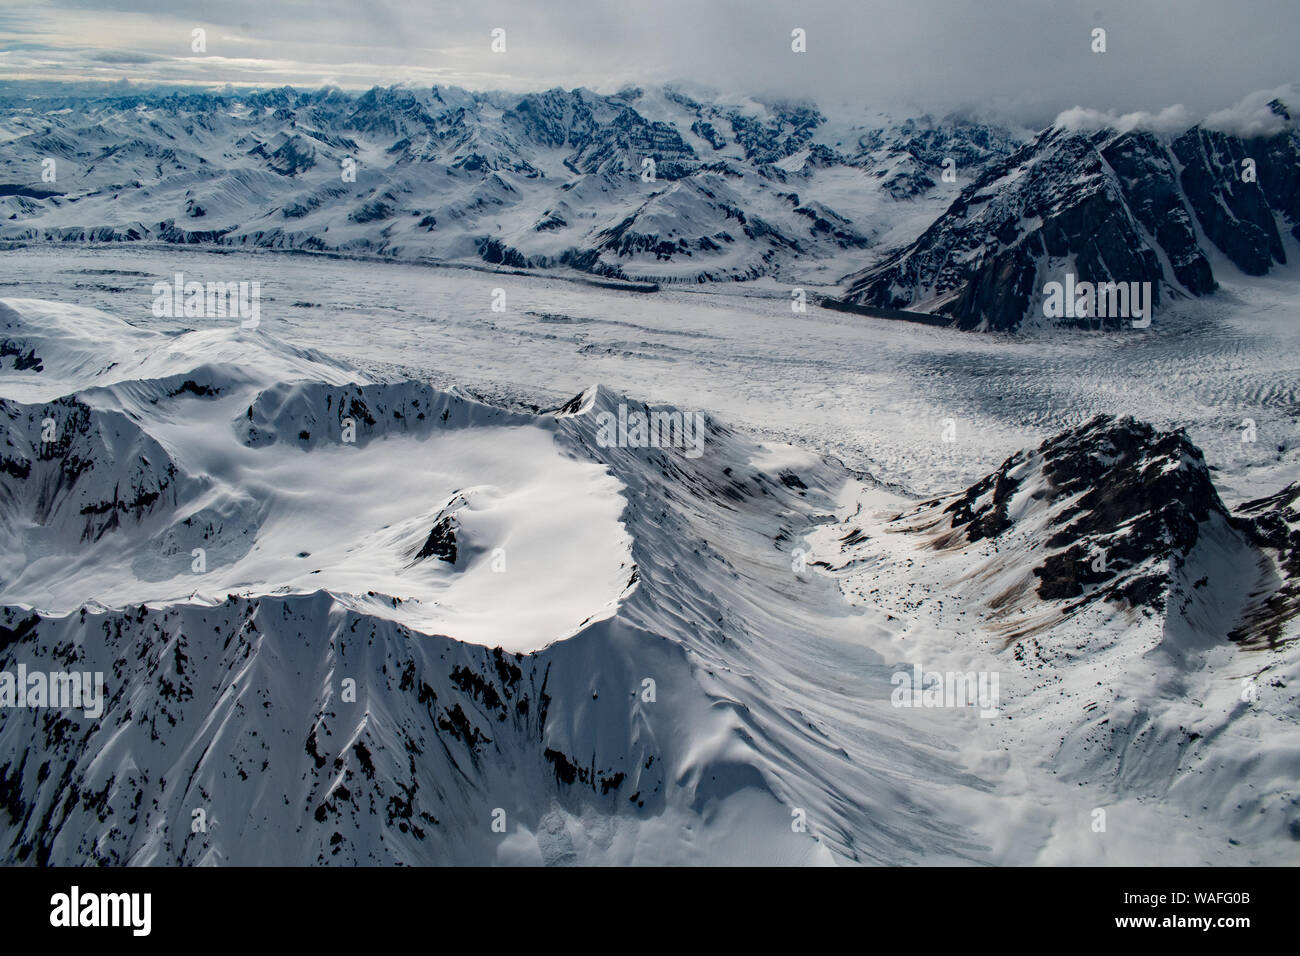 Aerial view of Alaska mountains and glaciers Stock Photo